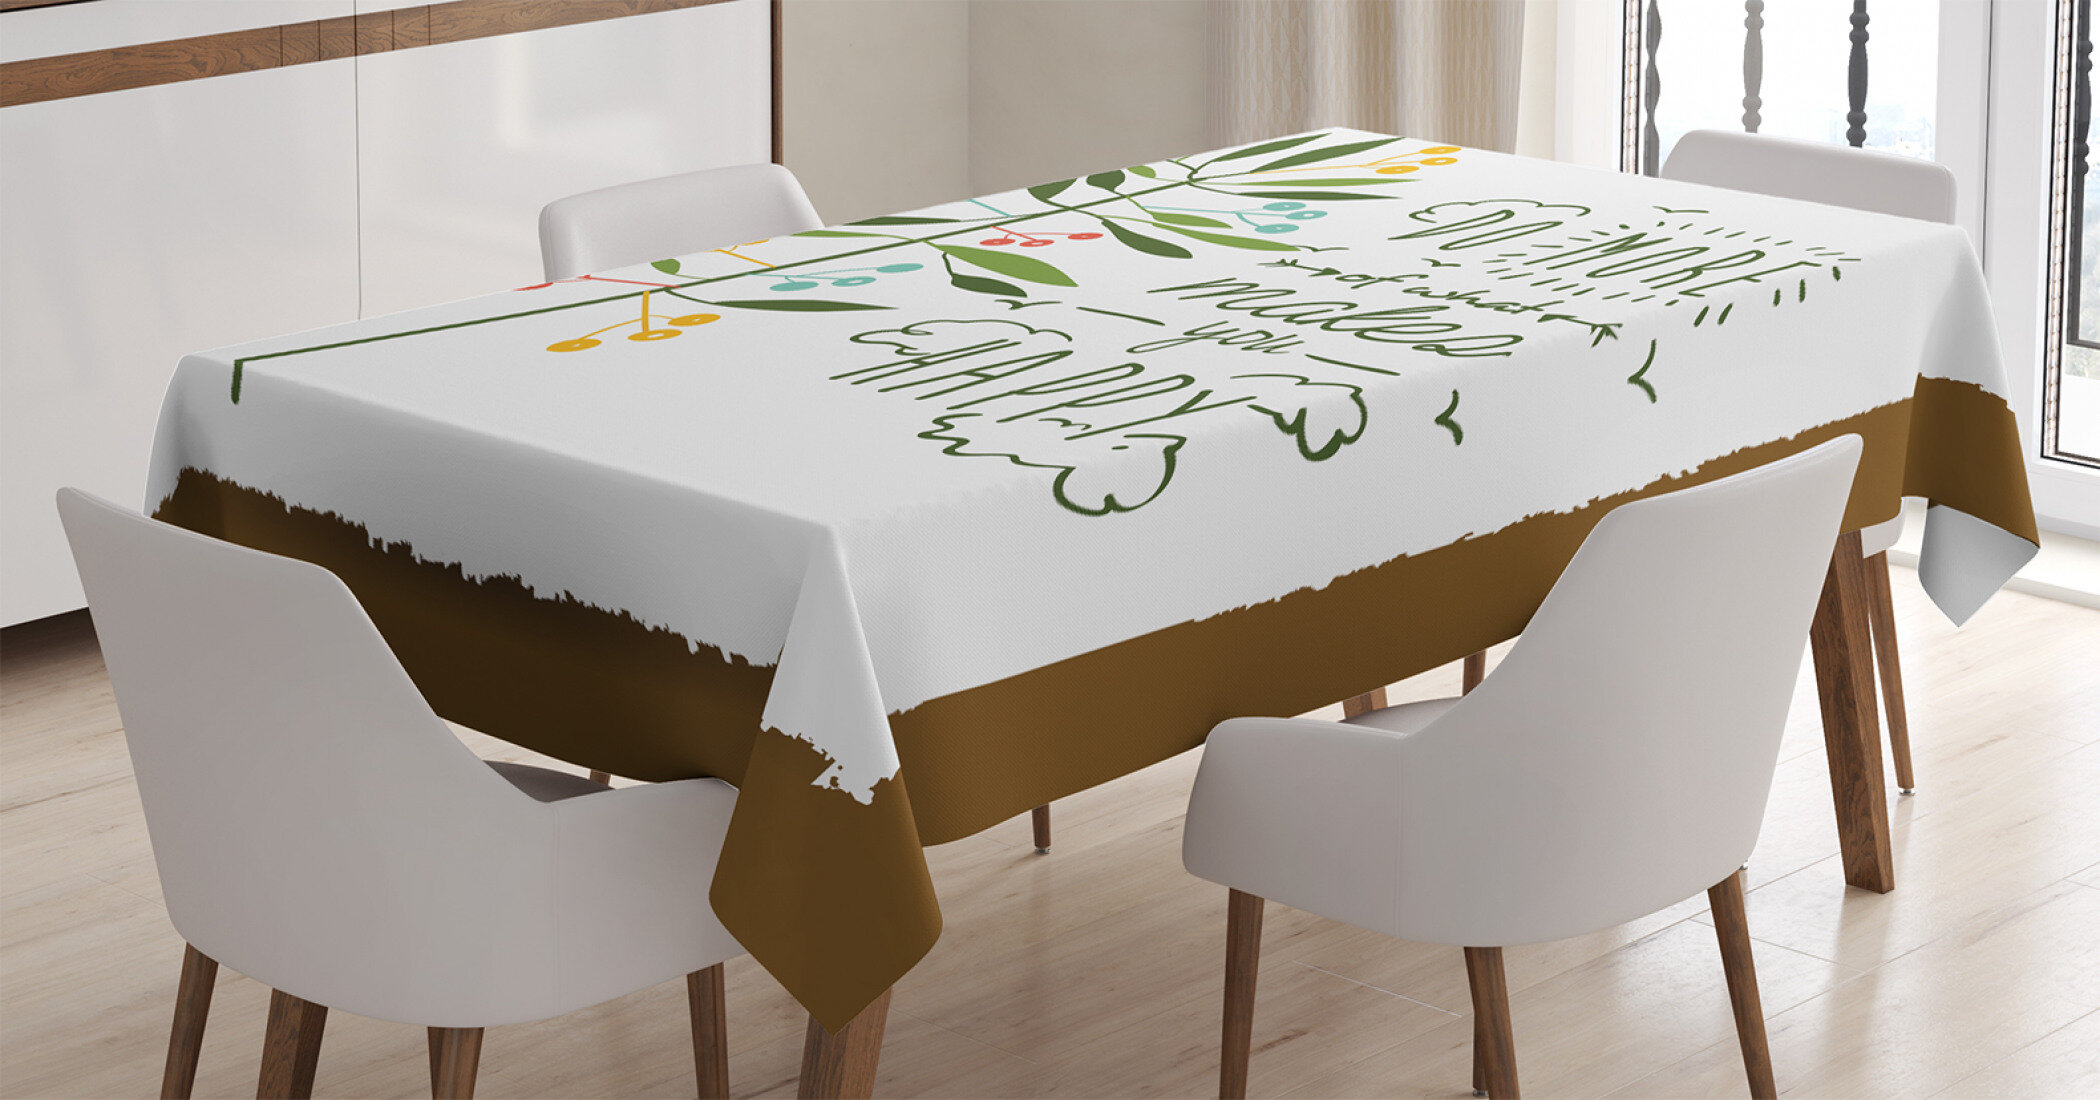 Fern Green Multicolor Ambesonne Flowers Insects Tablecloth 60 X 84 Rectangular Table Cover for Dining Room Kitchen Decor Watercolor Style Burgeoning Floral Details 